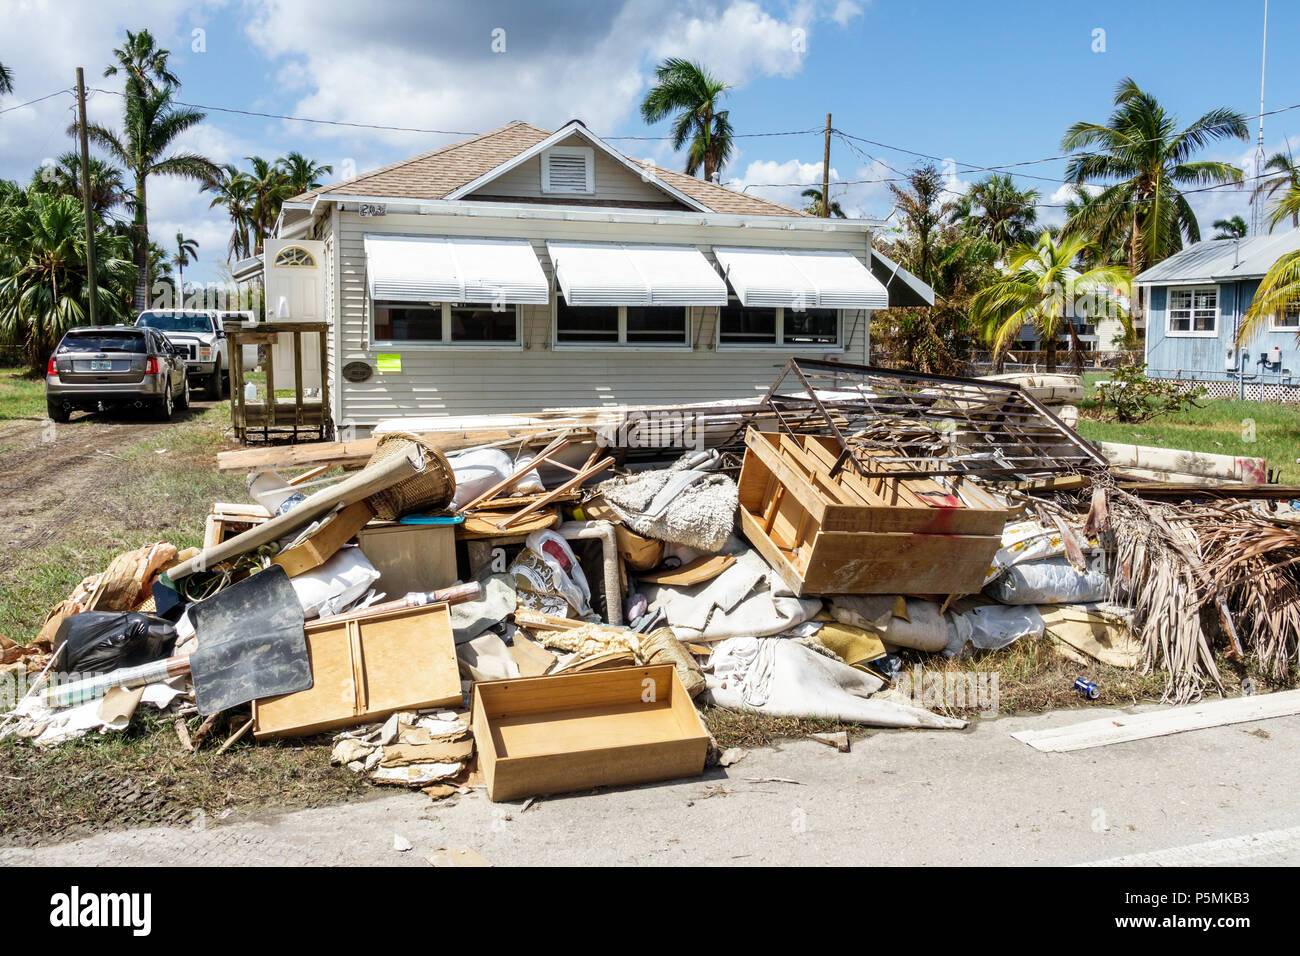 Everglades City Florida,after Hurricane Irma,houses homes residence,storm disaster recovery cleanup,surge flood damage destruction aftermath,trash,deb Stock Photo